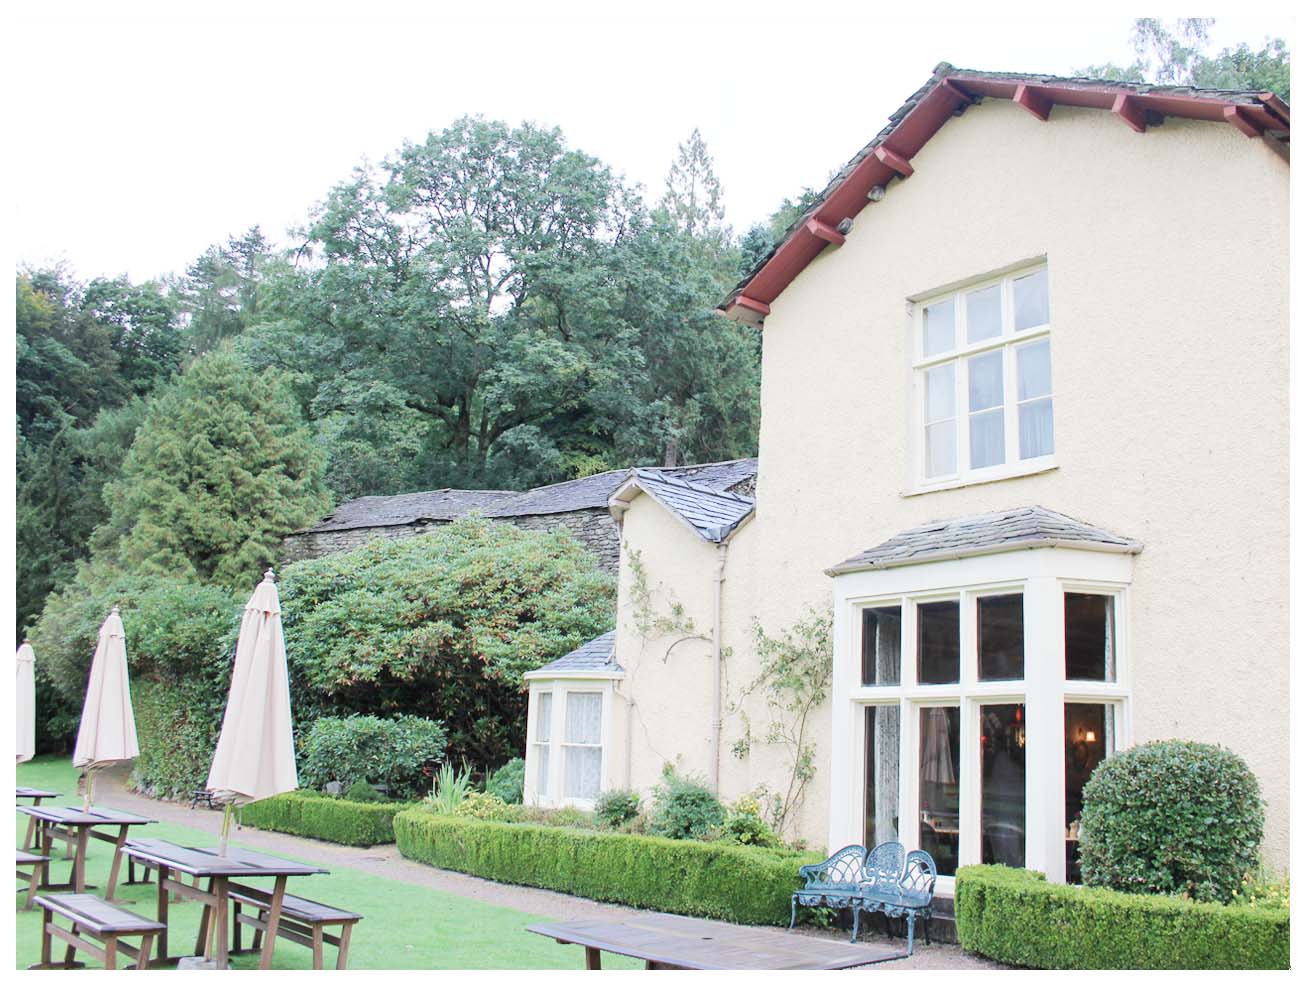 Lancrigg Vegetarian Country House Hotel, The Lakes